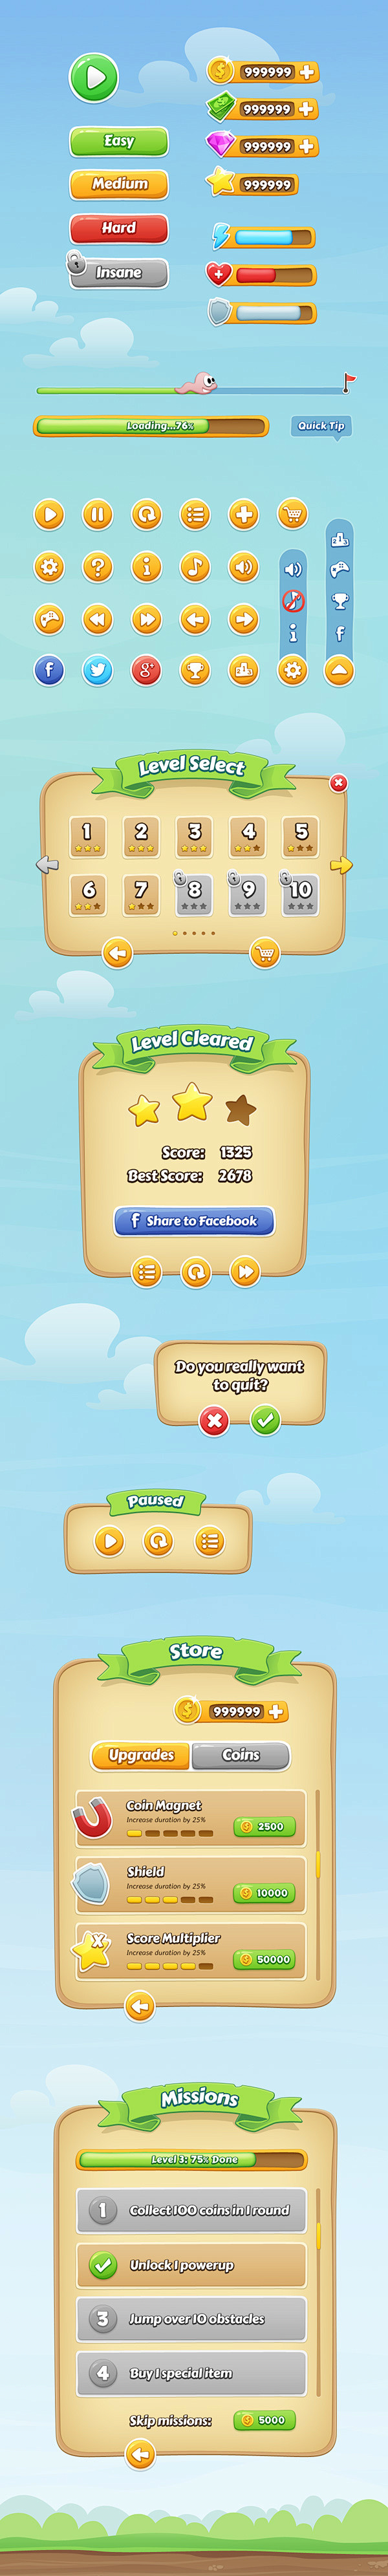 Mobile Game GUI - PS...